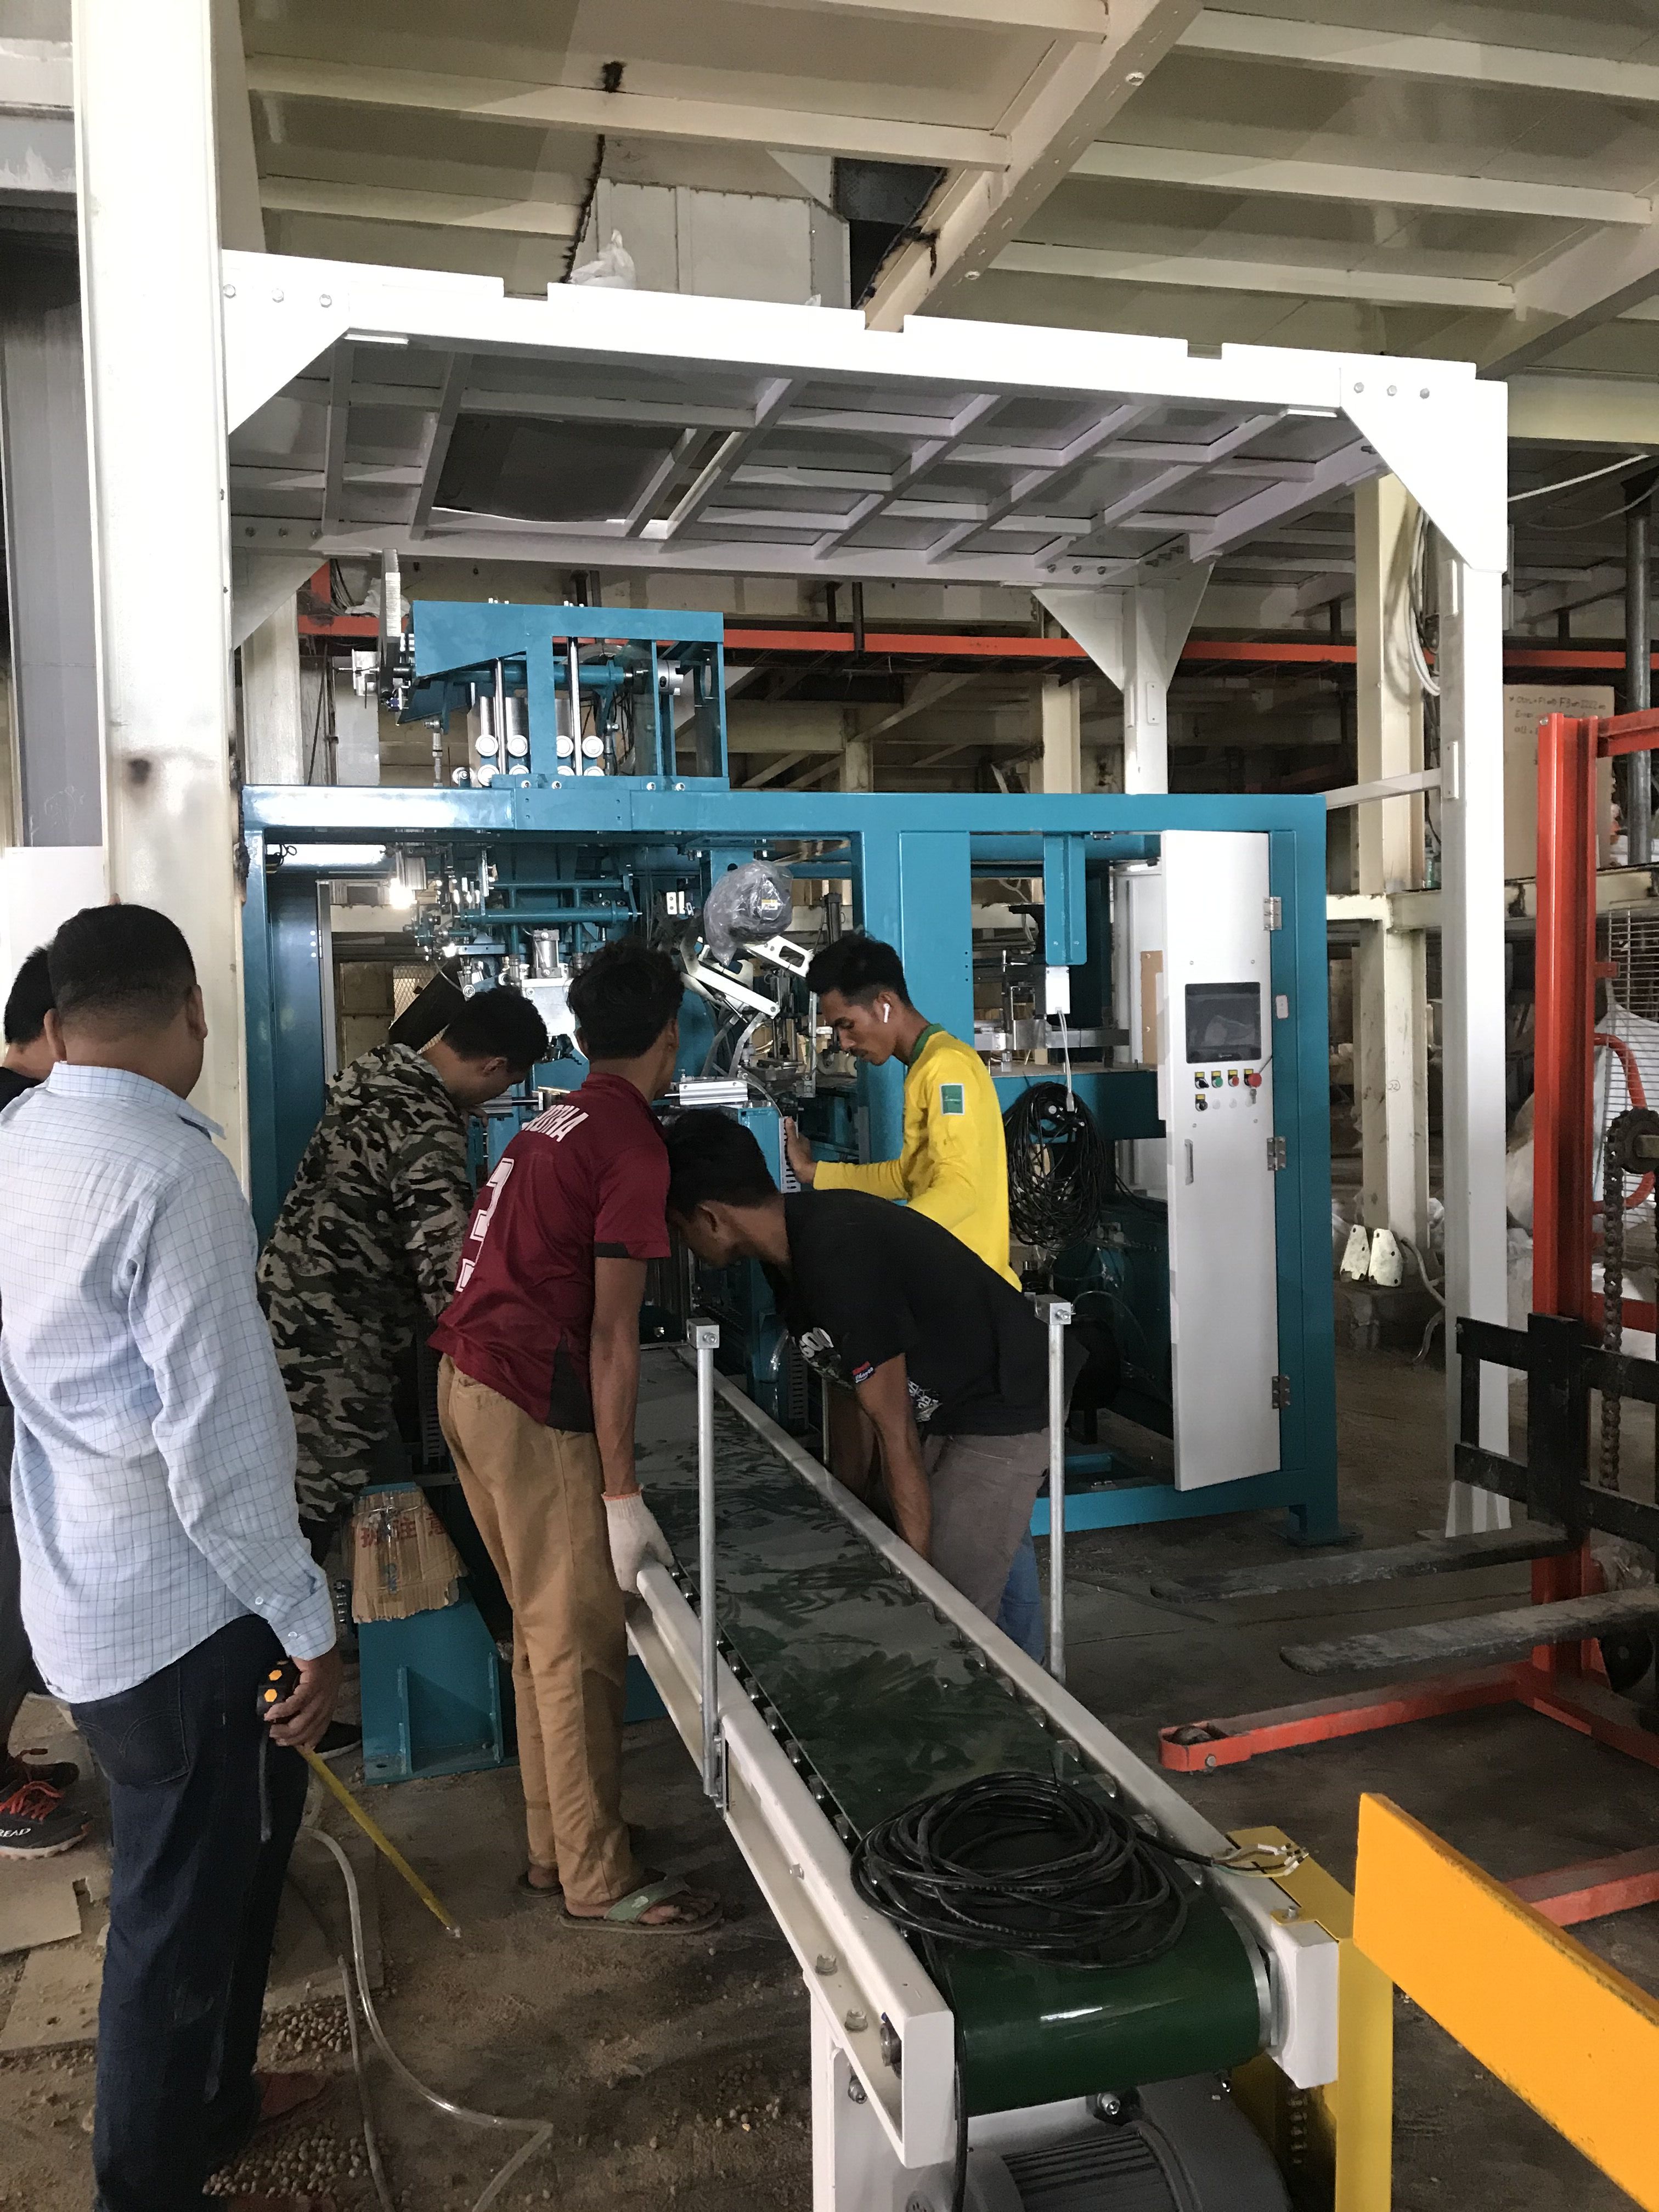 Automatic RICE PACKING MACHINE bagging system bagger station bagging machine automated bagging line packaging machine autoamtic packing and sewing machine